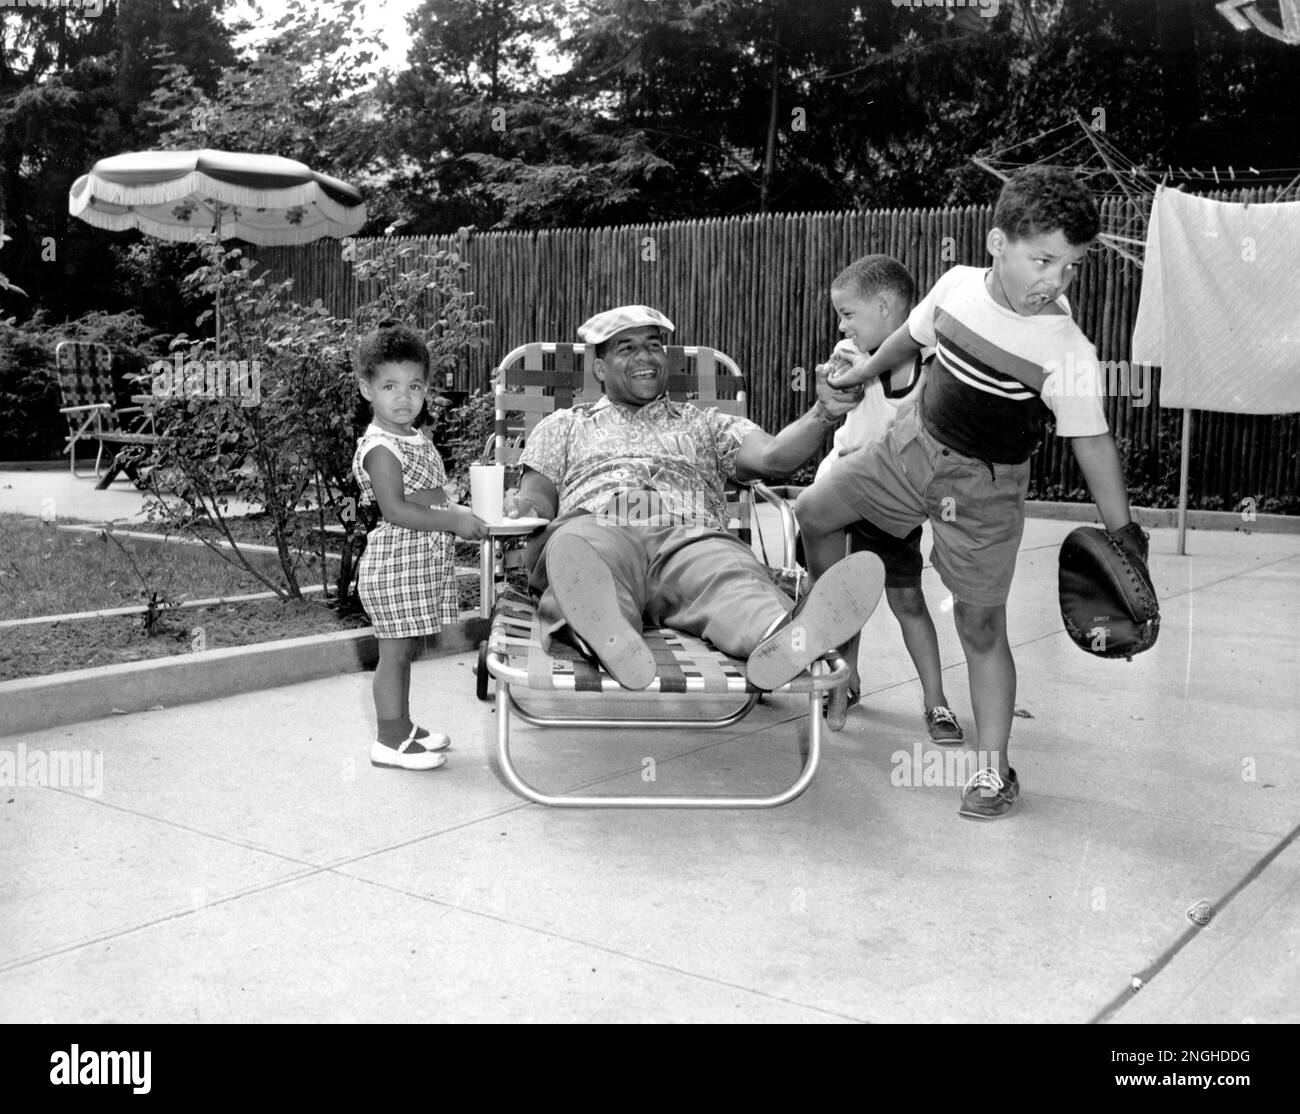 Brooklyn Dodgers catcher Roy Campanella, who is out with an injured knee,  is being persuaded by his sons, Tony, 5, and Roy Jr., 7, right, to play  baseball in their backyard in